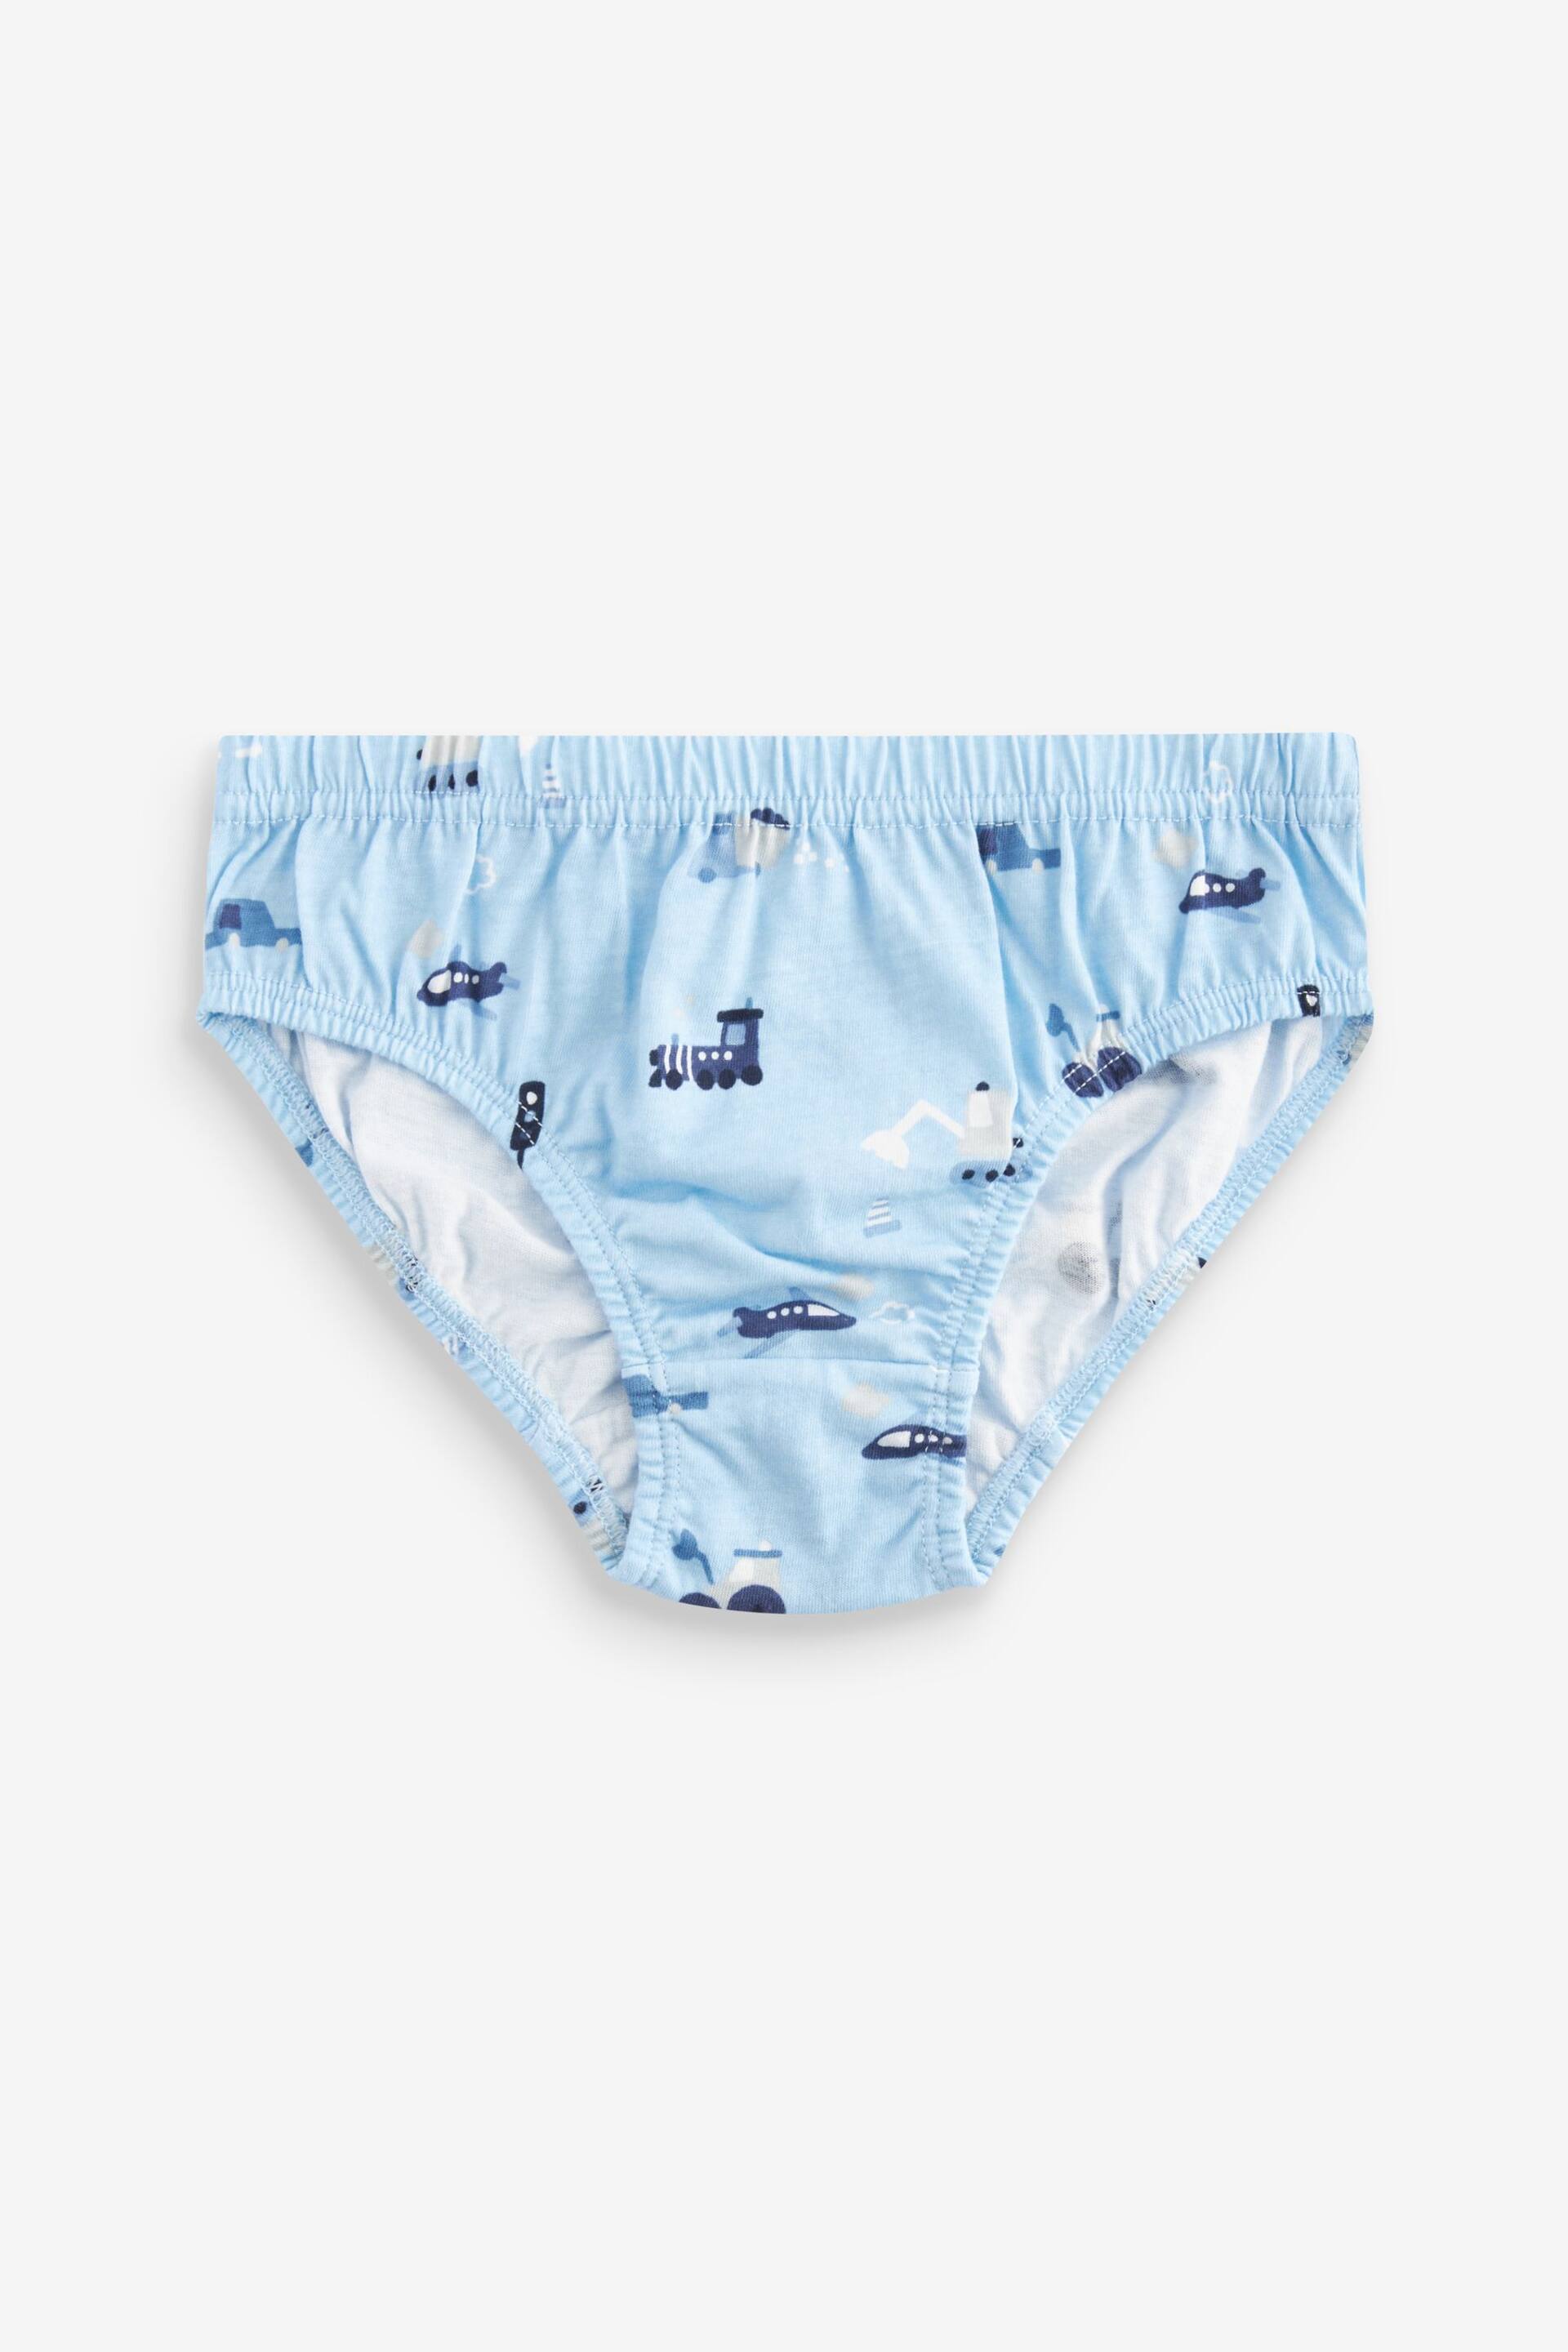 Blue Vehicle Print Briefs 5 Pack (1.5-10yrs) - Image 5 of 8